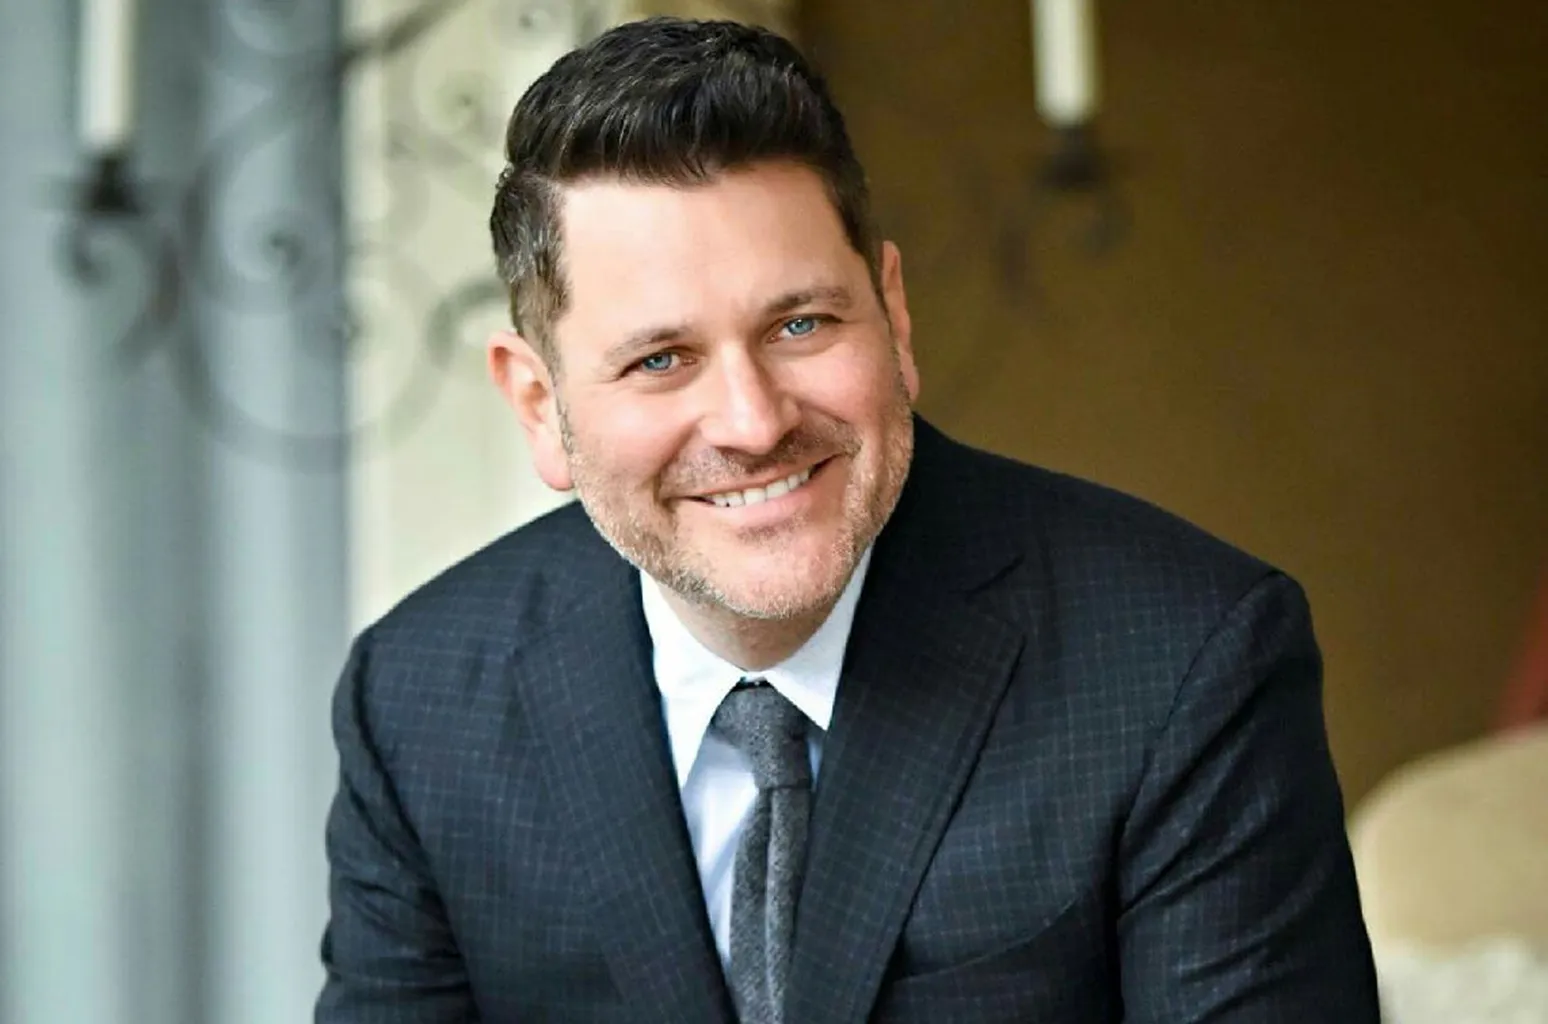 15 Intriguing Facts About Jay DeMarcus - Facts.net